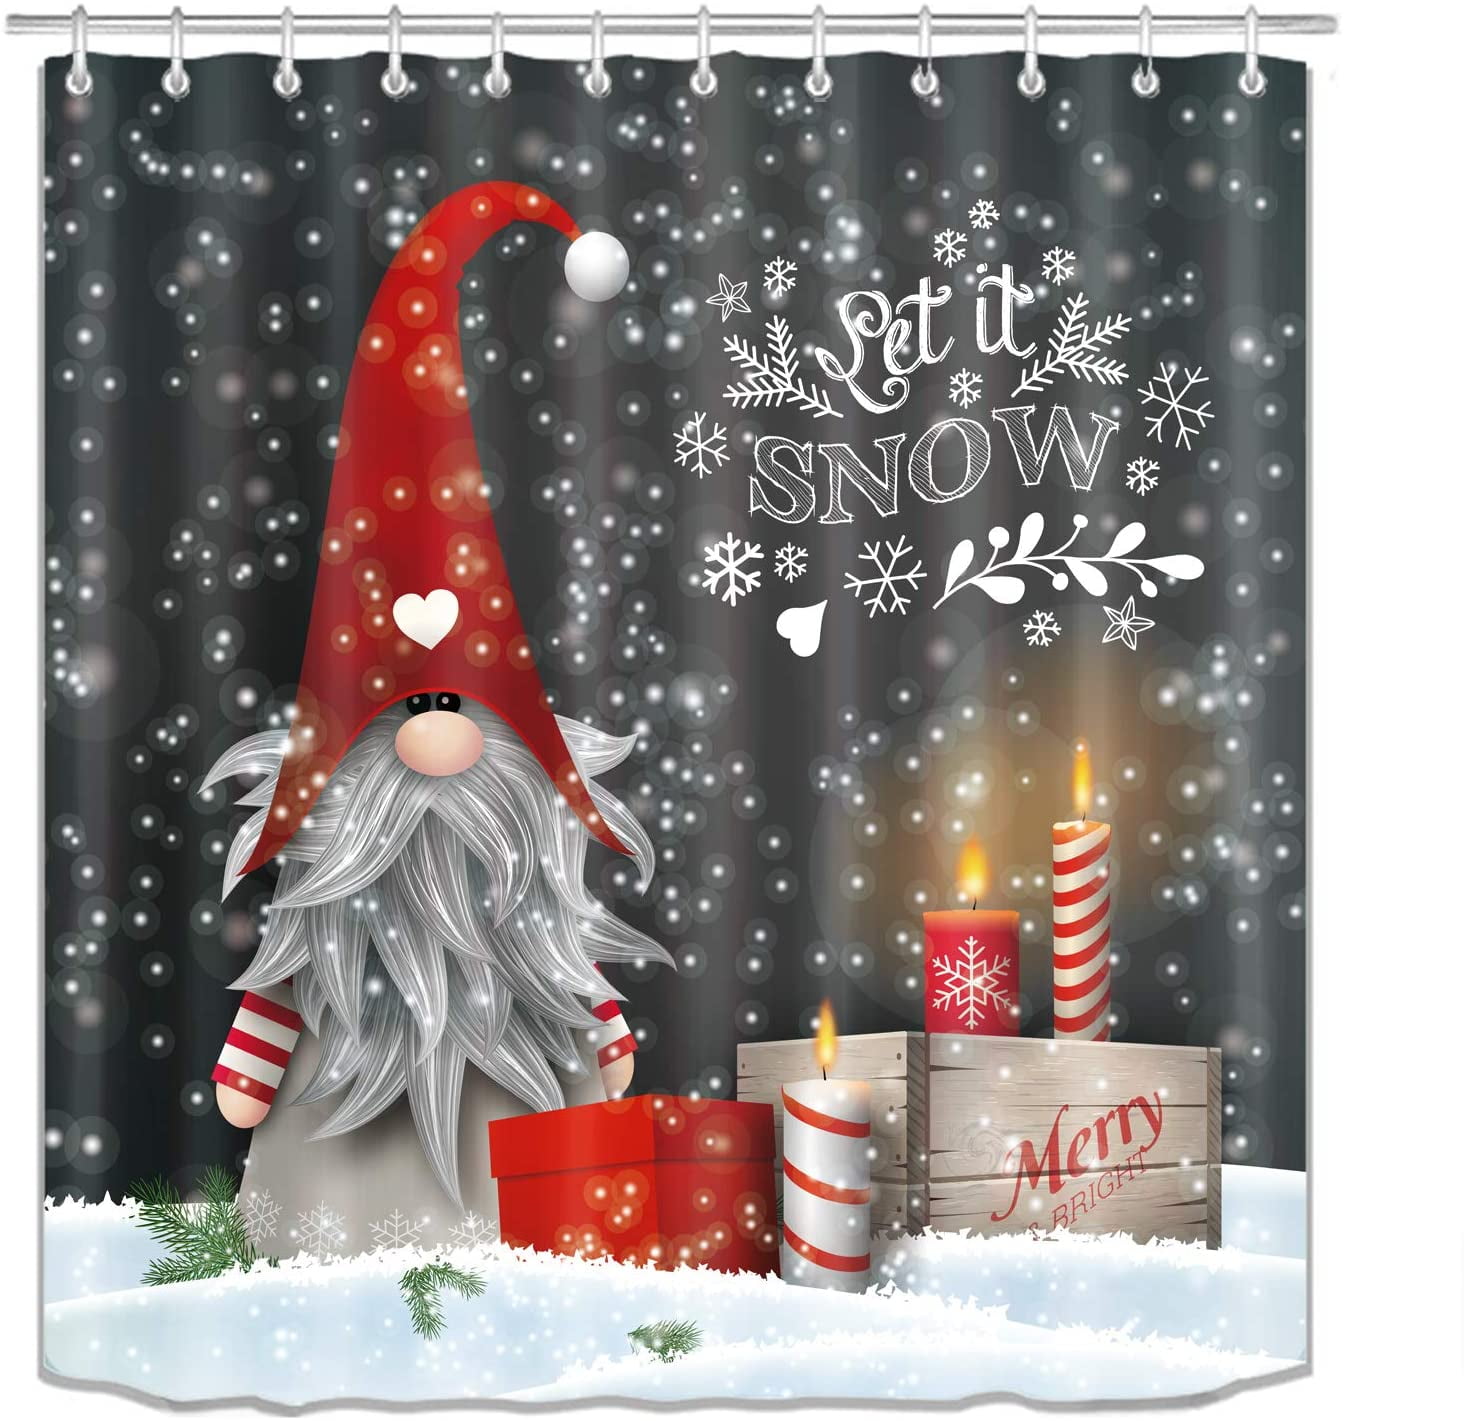 Details about   Christmas Gnome Elves Shower Curtain Set Fir Branches Red Berries Bathroom Decor 